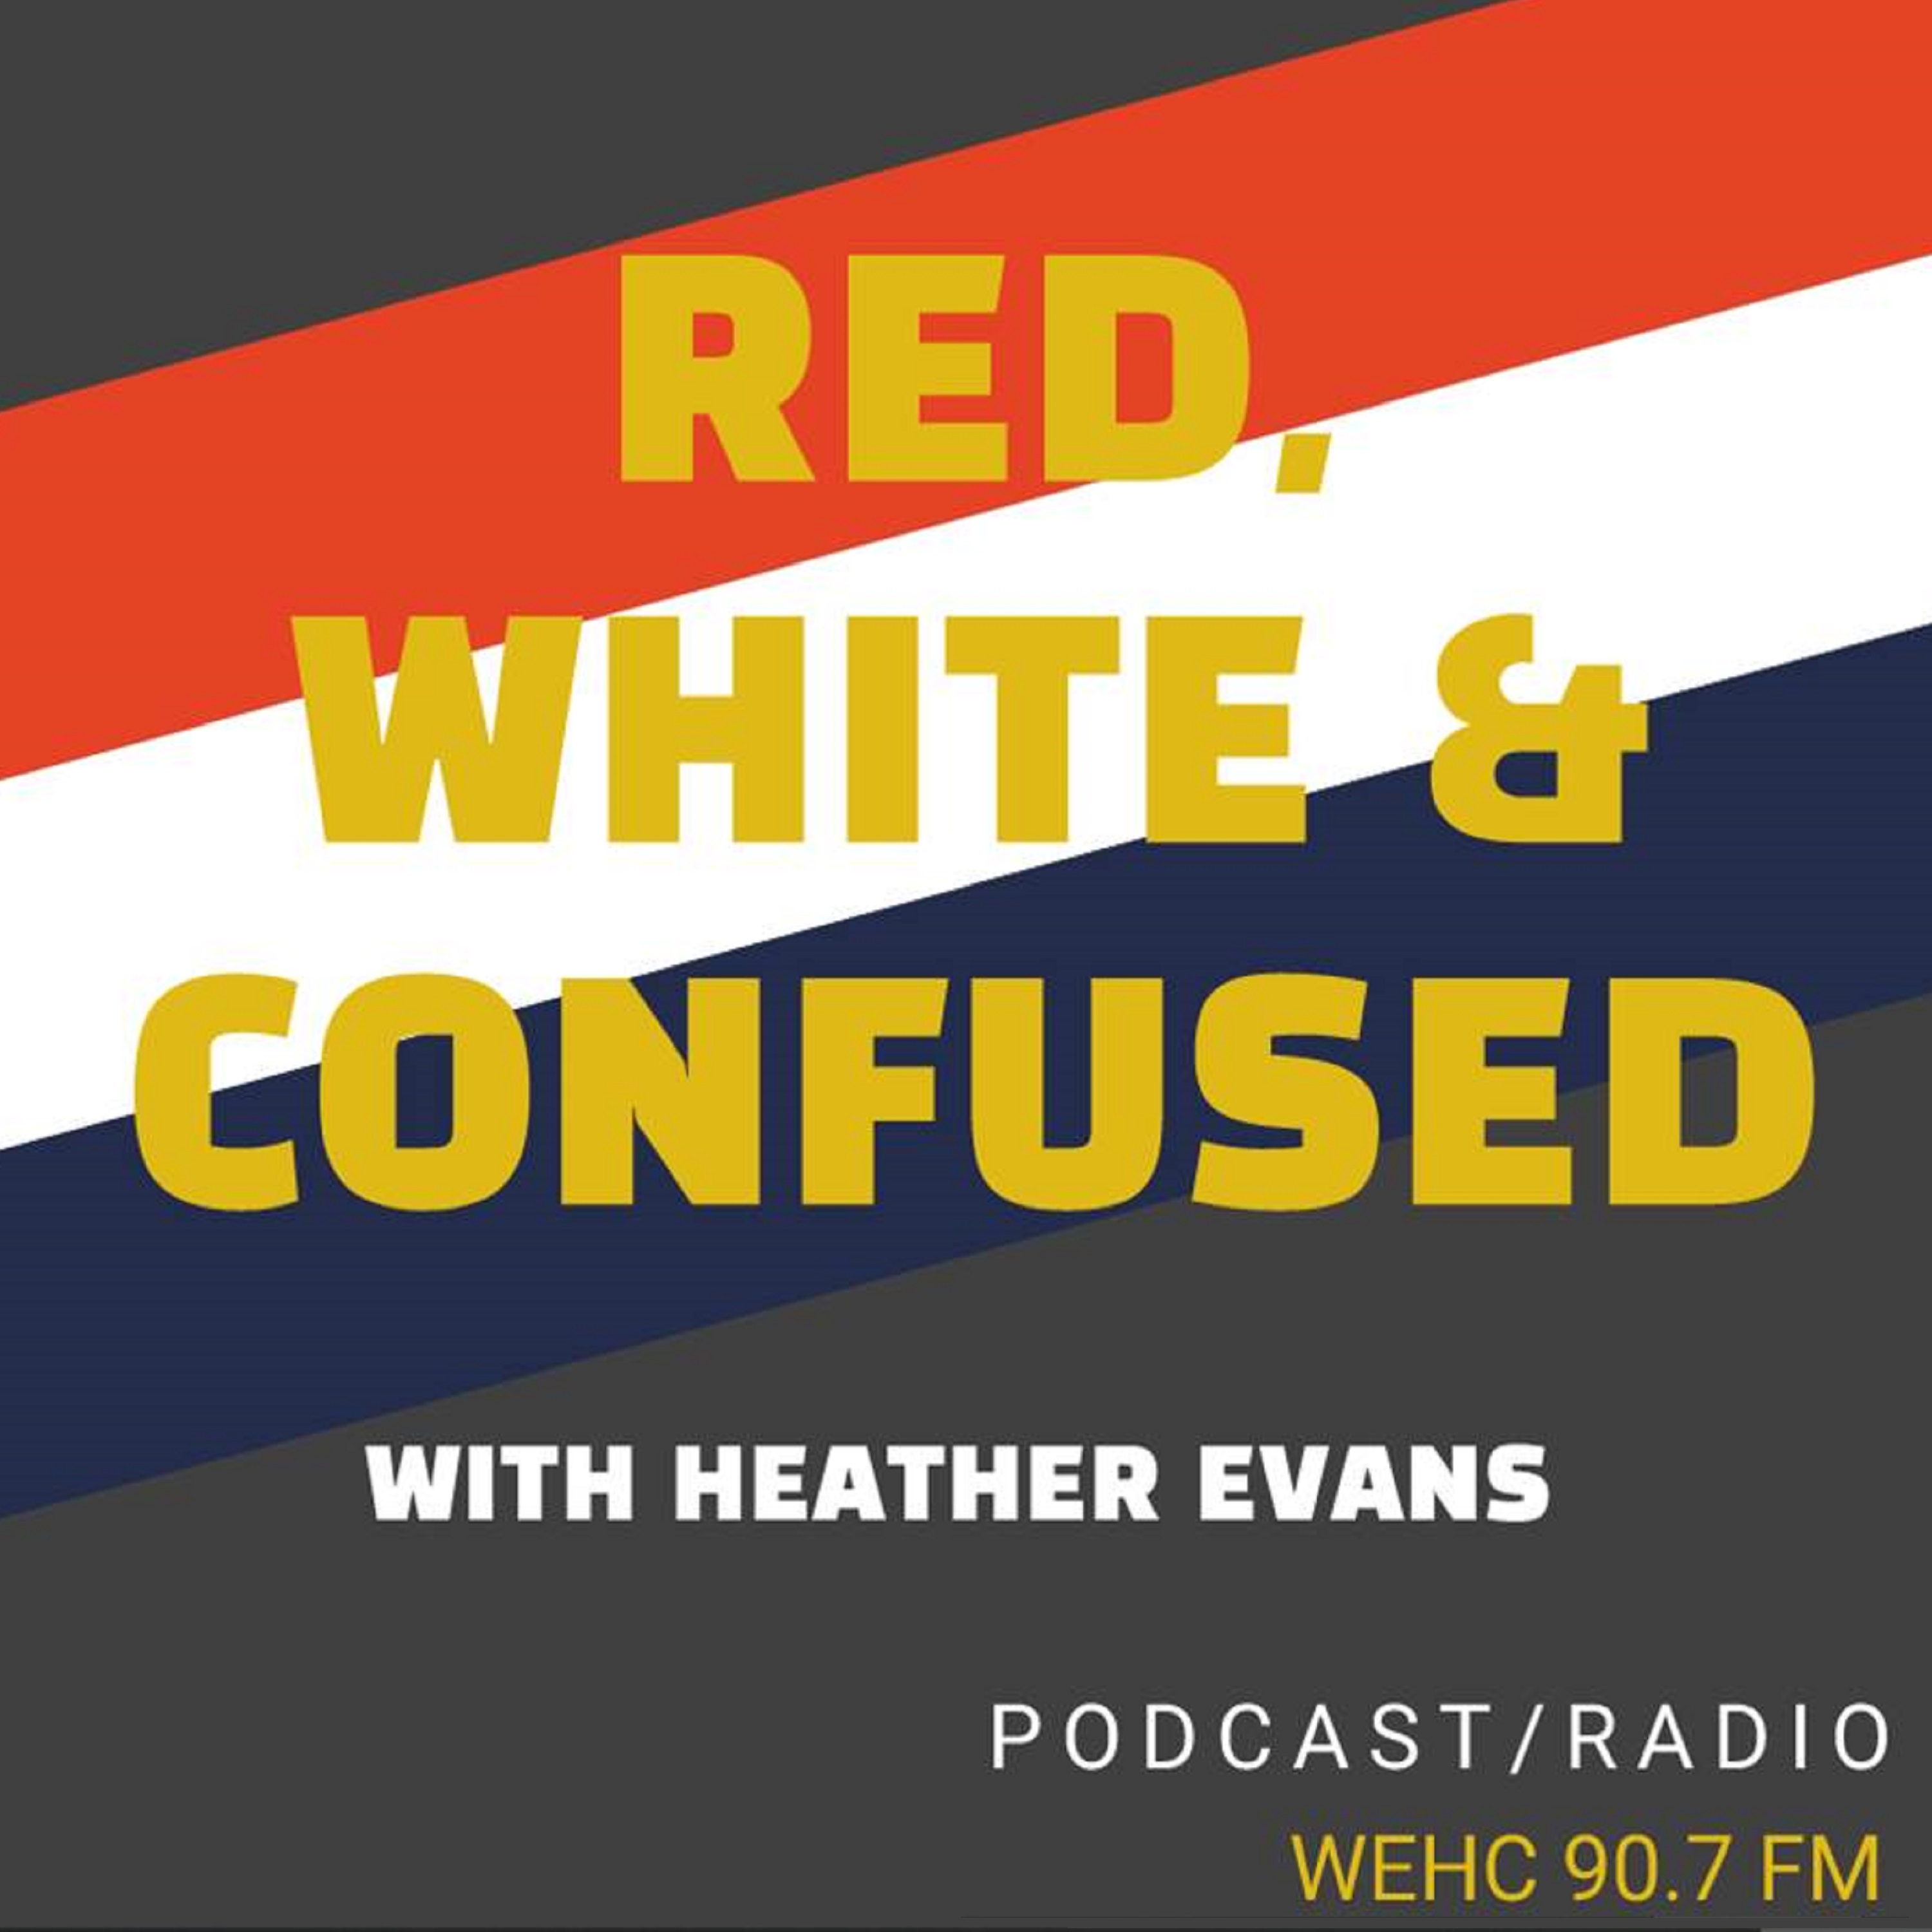 Artwork for Red, White, and Confused